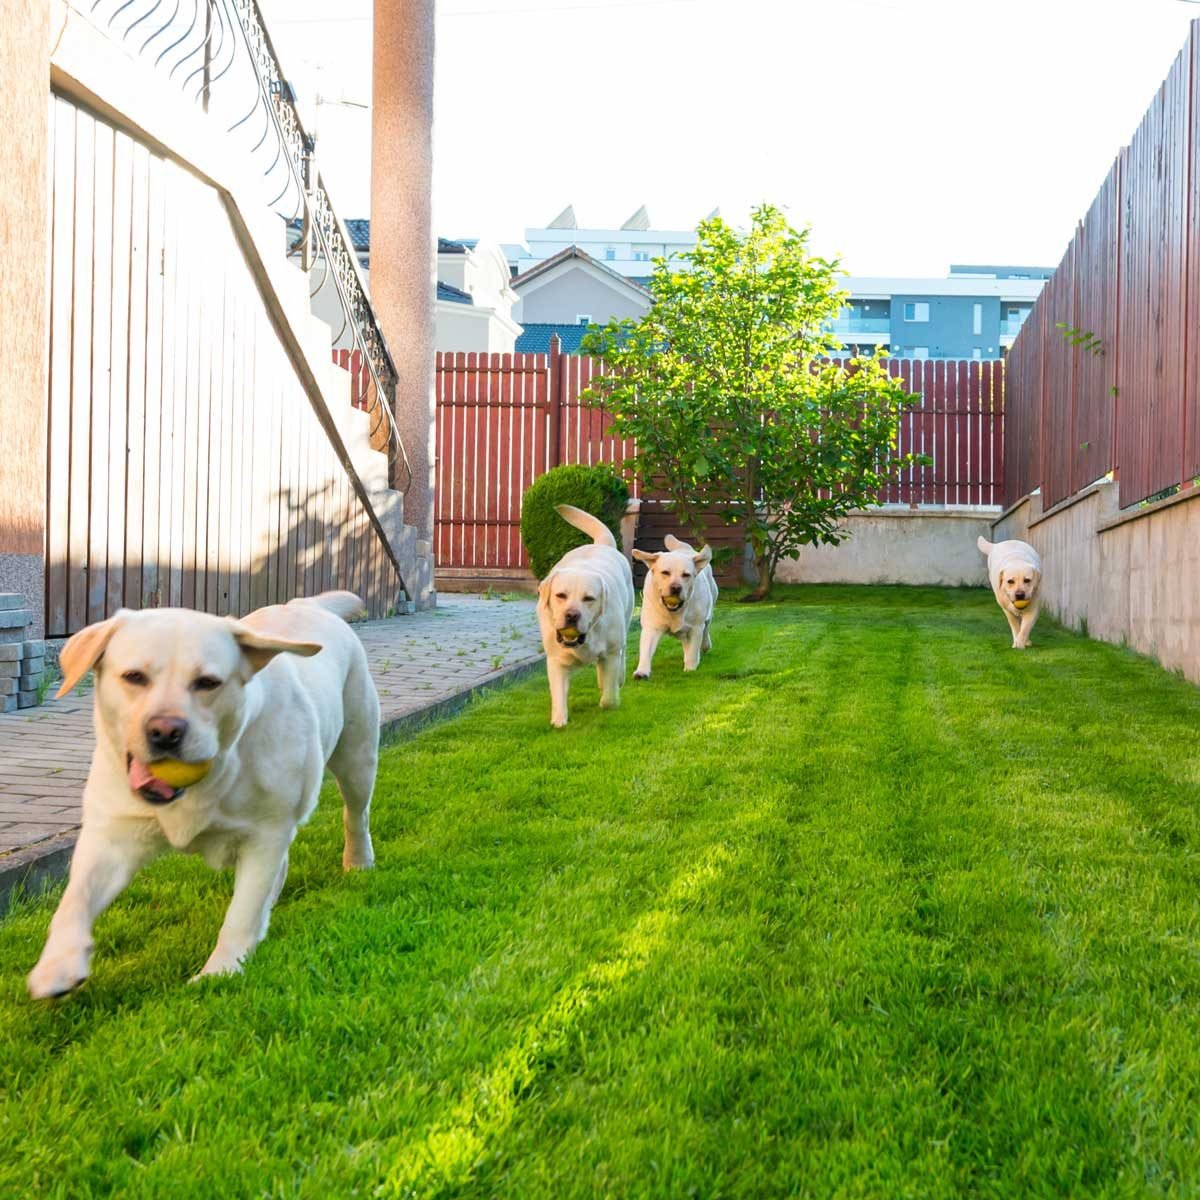 How To Choose The Best Fence For Your Dog | The Family Handyman